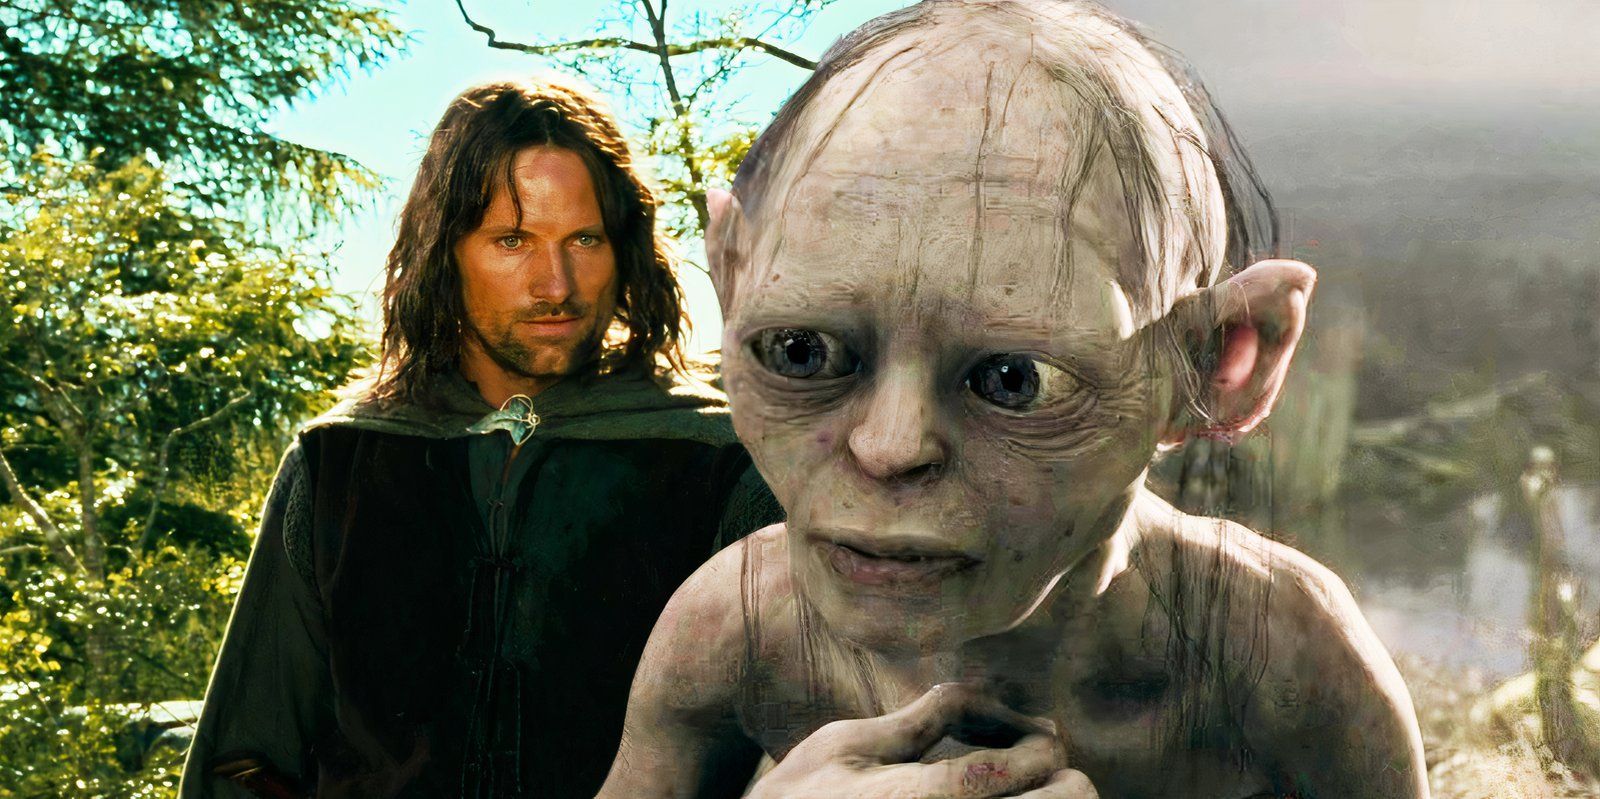 Gollum juxtaposed with Viggo Mortensen as Aragorn in The Lord of the Rings trilogy